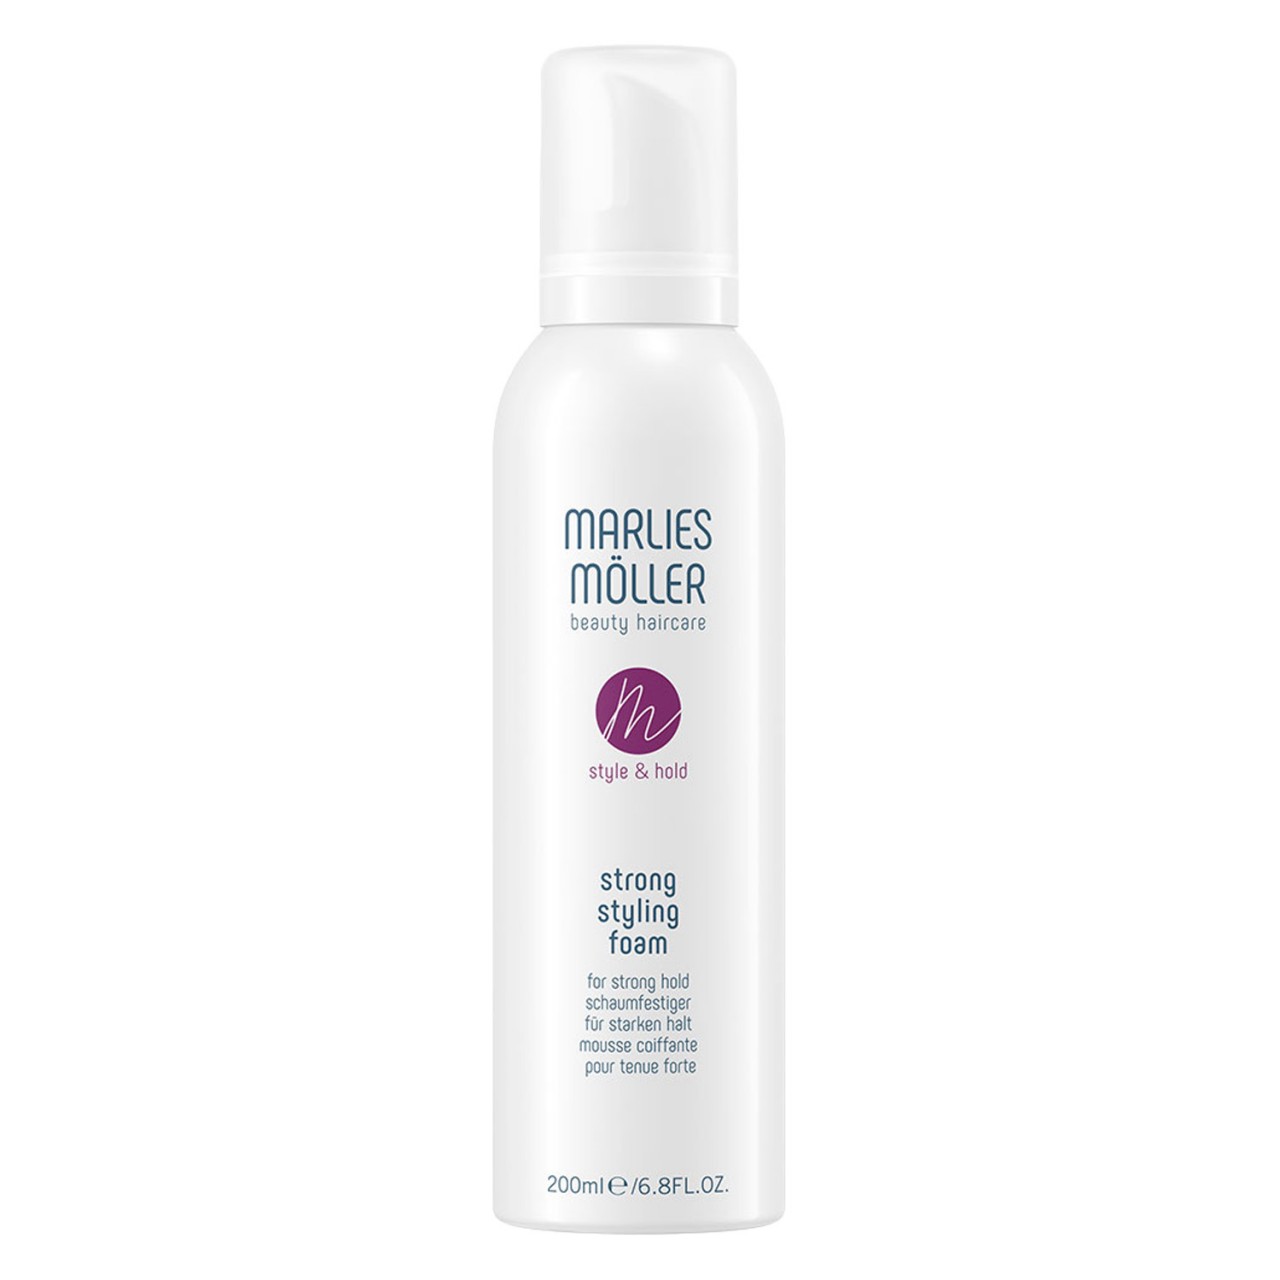 Marlies Möller Style & Hold Mousse coiffante forte Mousse fixante 200 ml